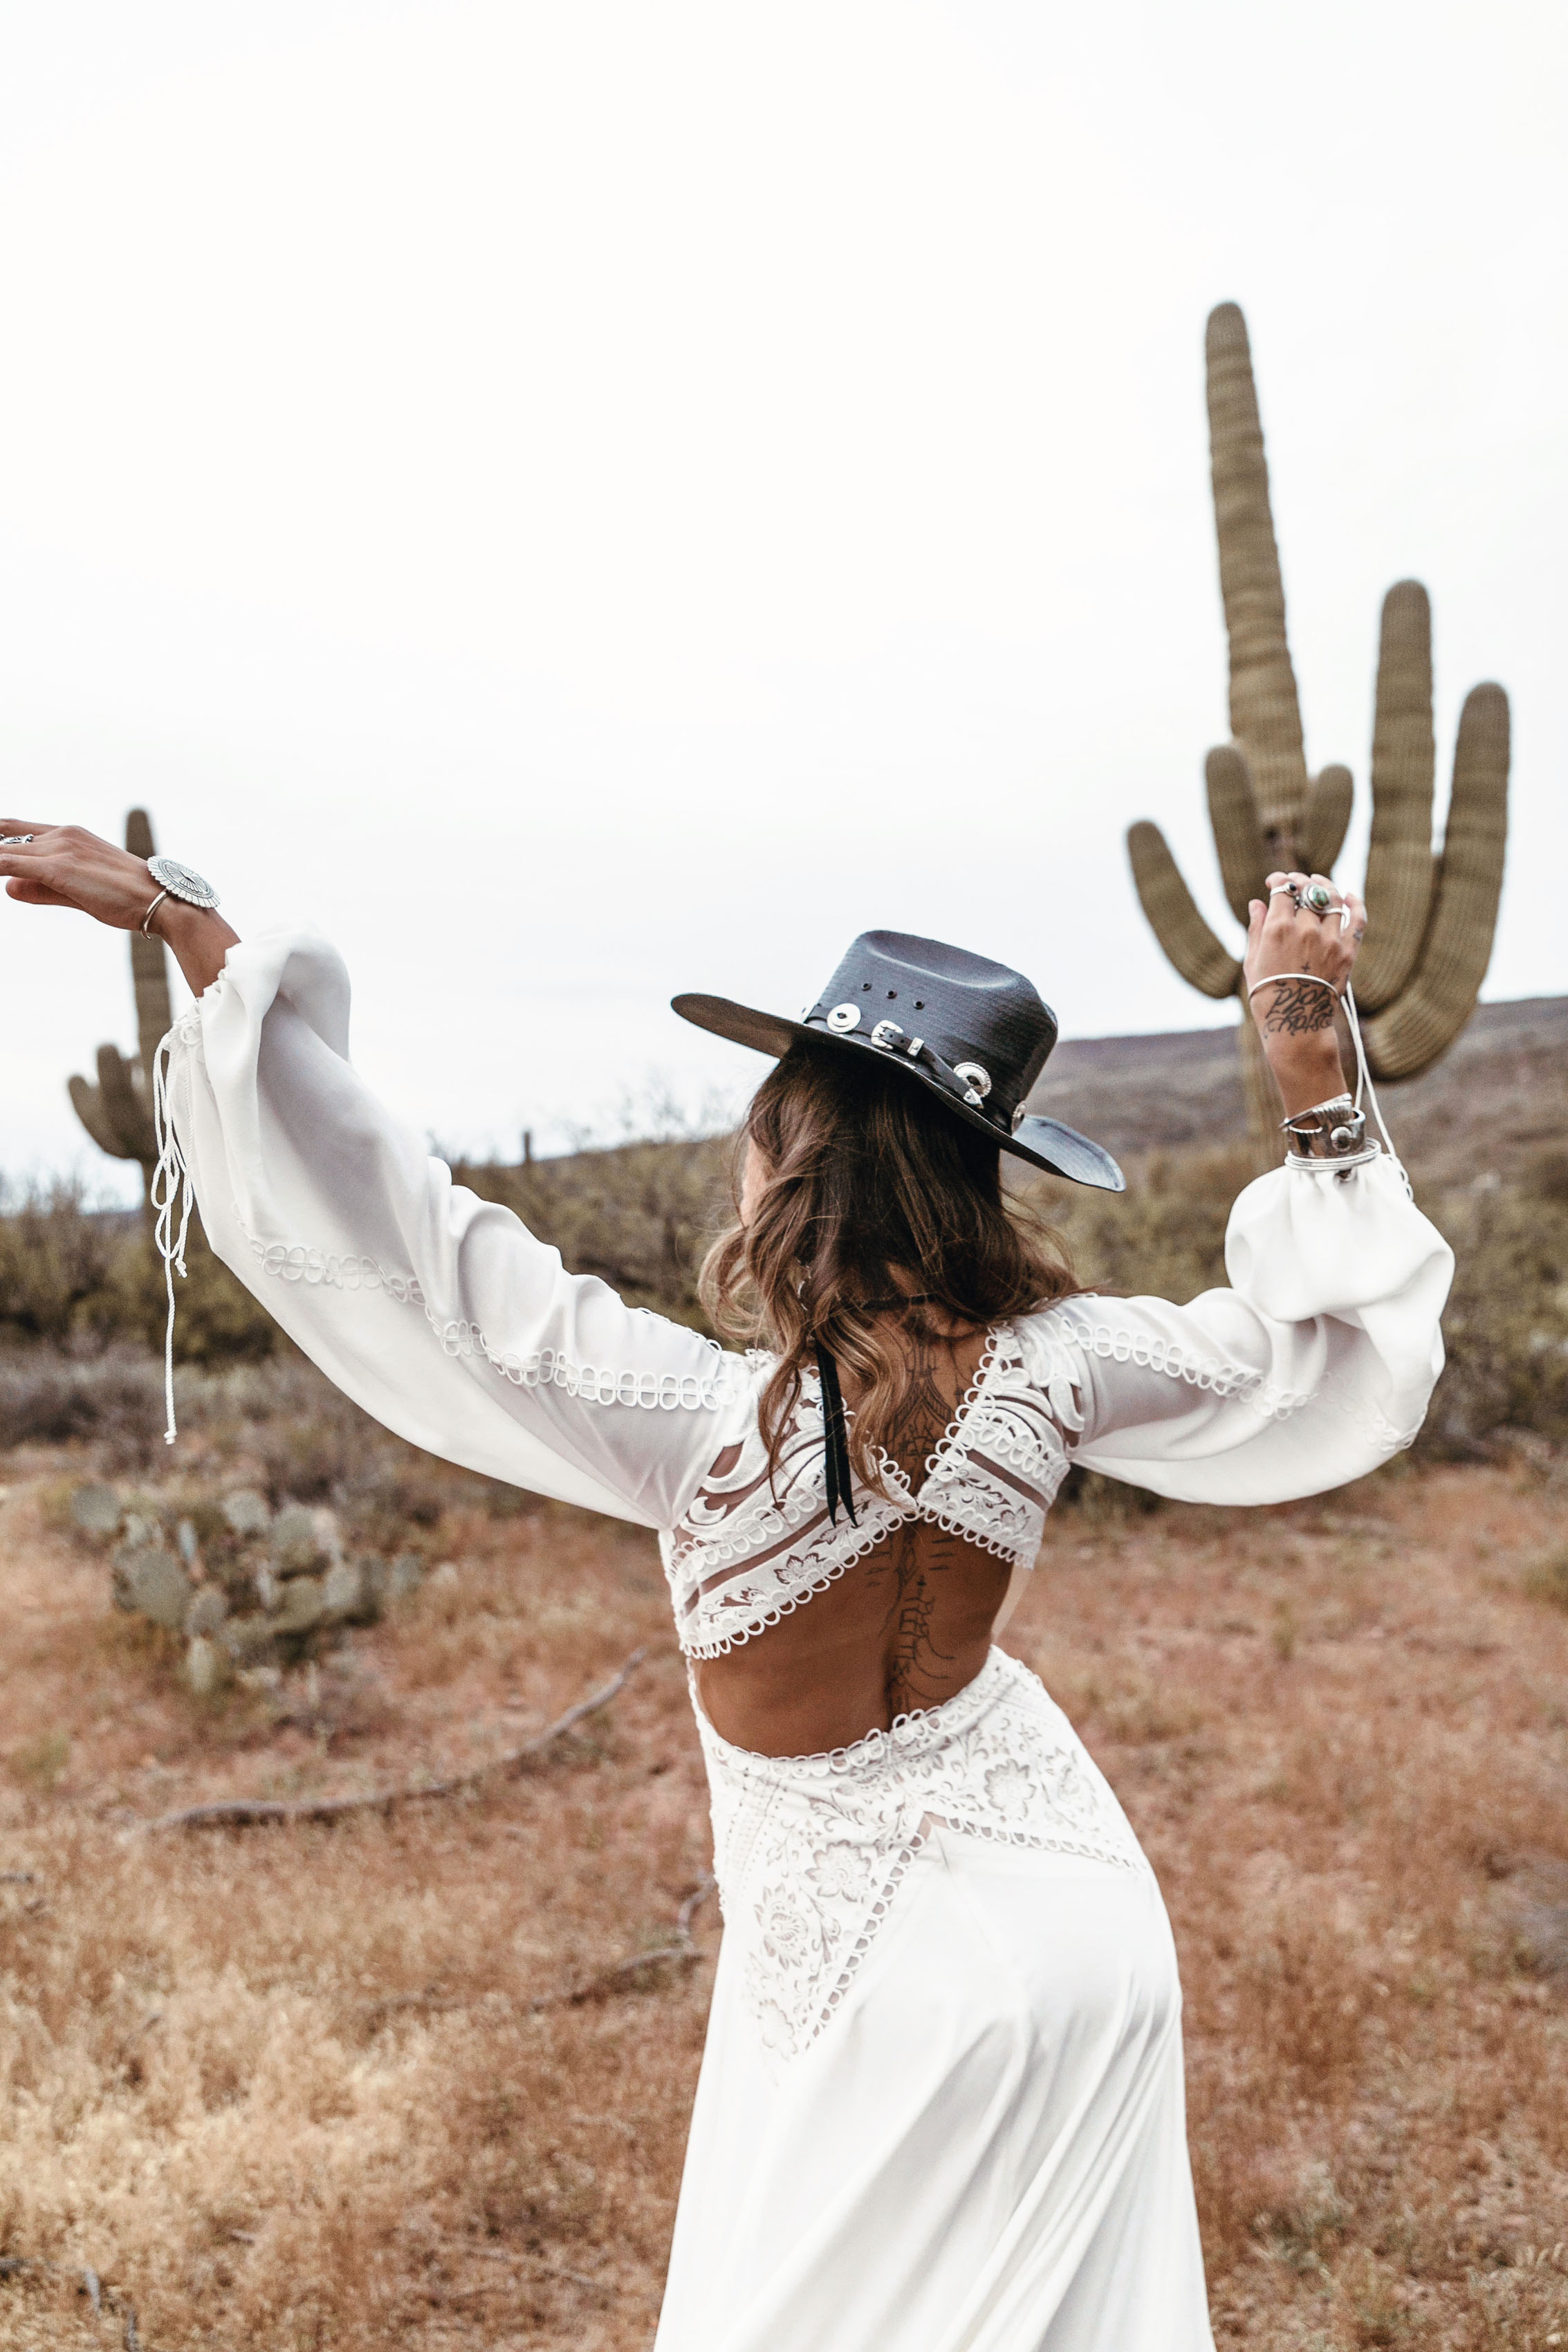  Presley Gown | Rue De Seine | Rue De Seine Bridal | Moonrise Canyon Collection 2019 | wild west inspired | free spirited bride | boho wedding | bohemian | boho bride | wedding Gown | bridal gown | plunging neckline, fitted bodice with side cut out, 